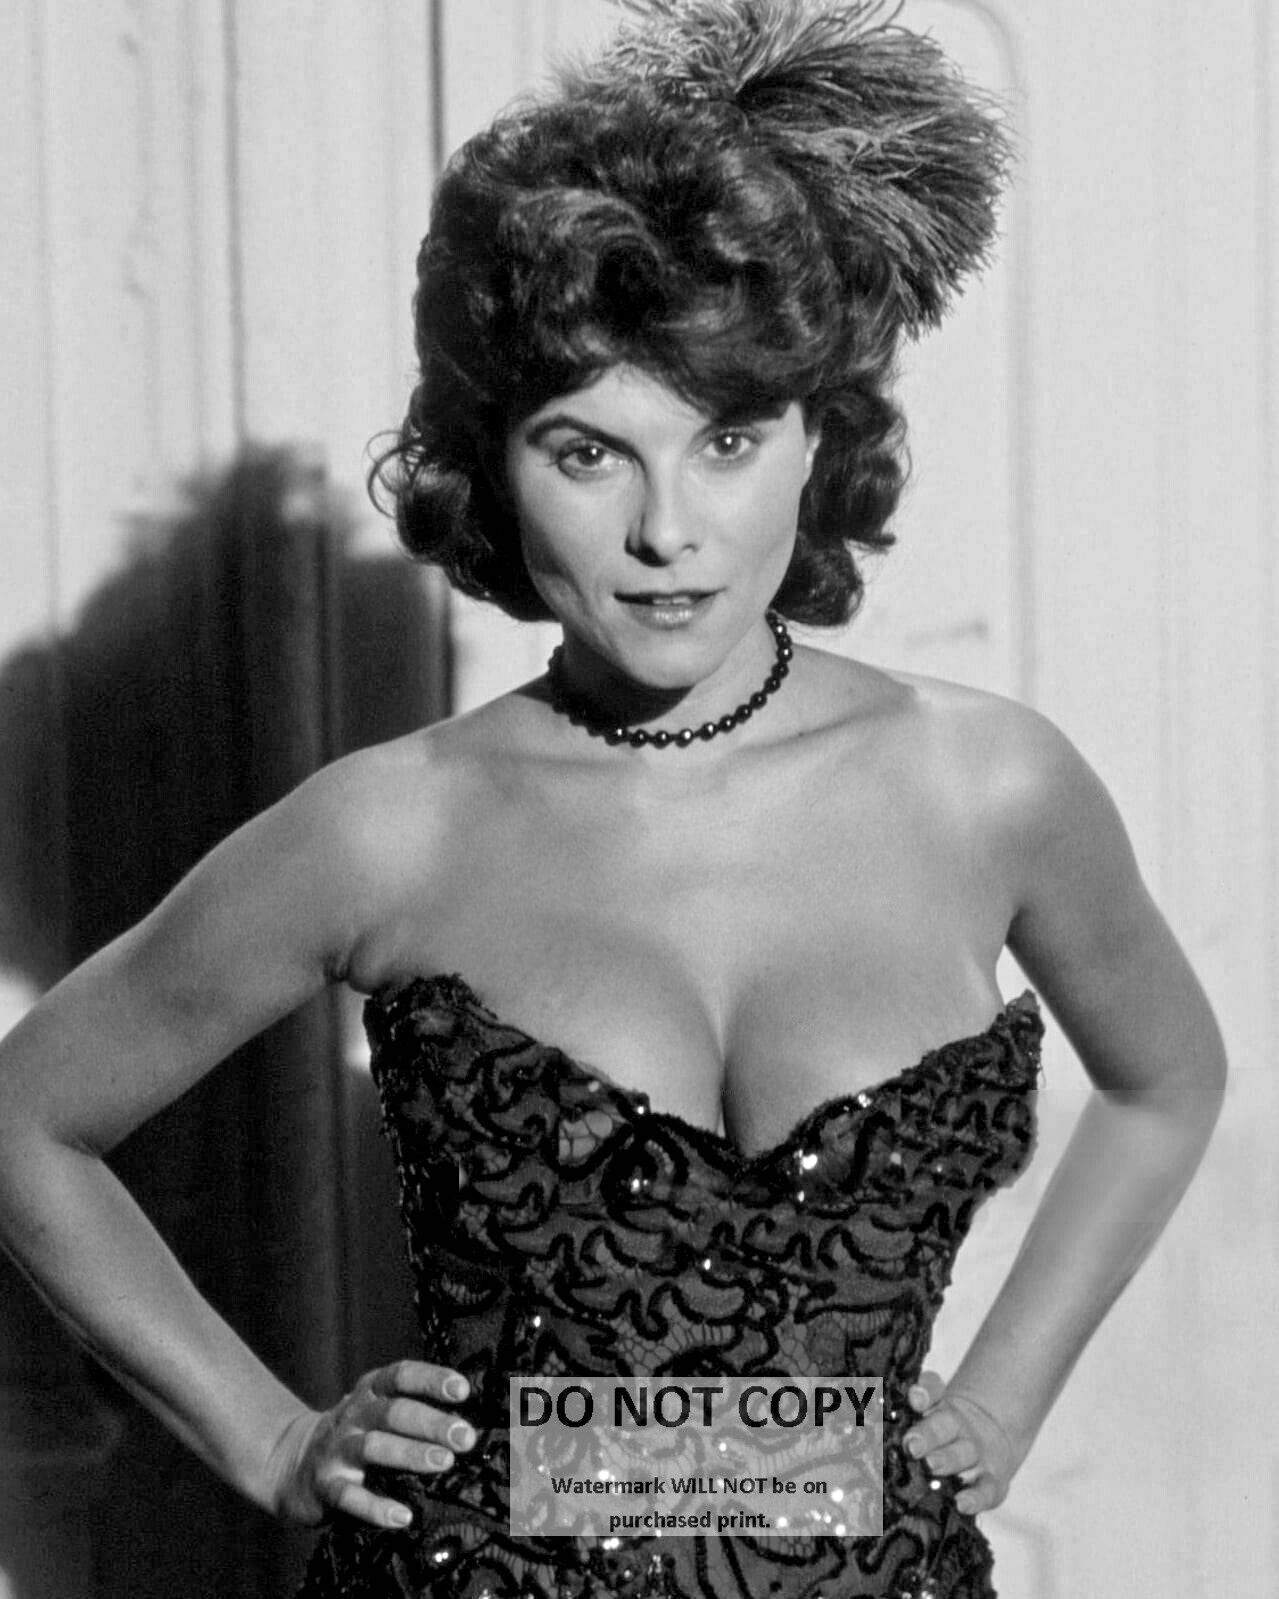 ACTRESS ADRIENNE BARBEAU PIN UP - 8X10 PUBLICITY PHOTO (DD959)